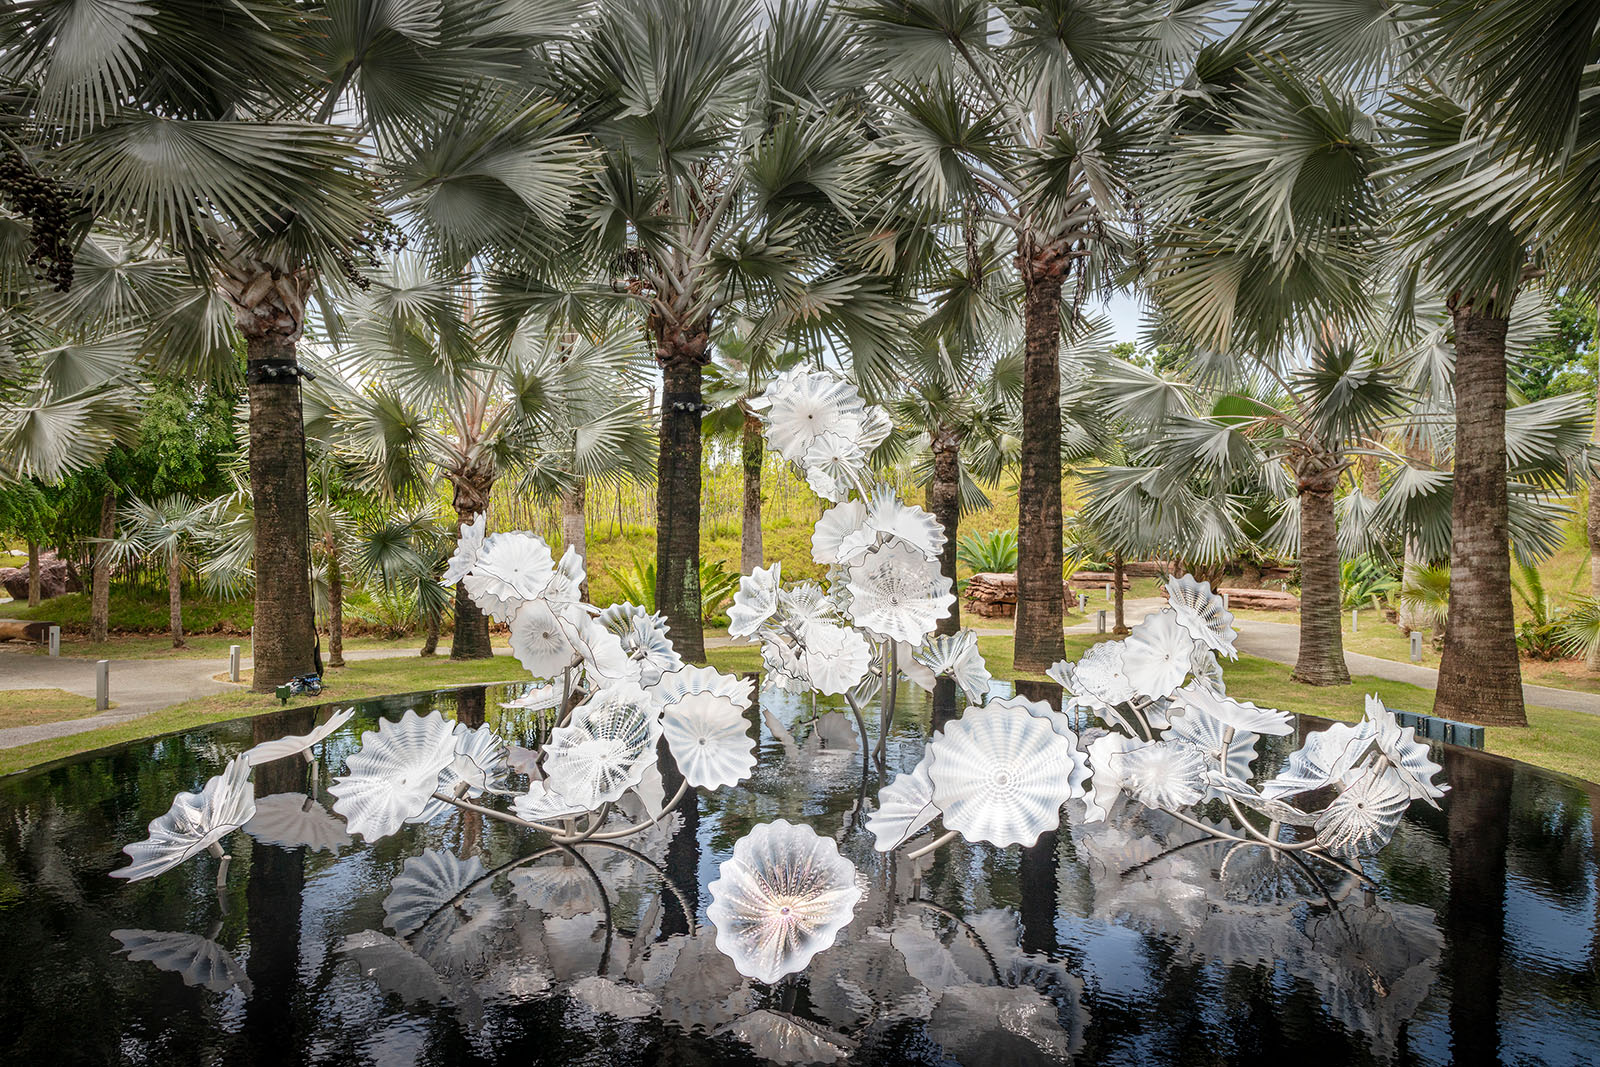 Ethereal White Persian Pond, 2018 by Dale Chihuly